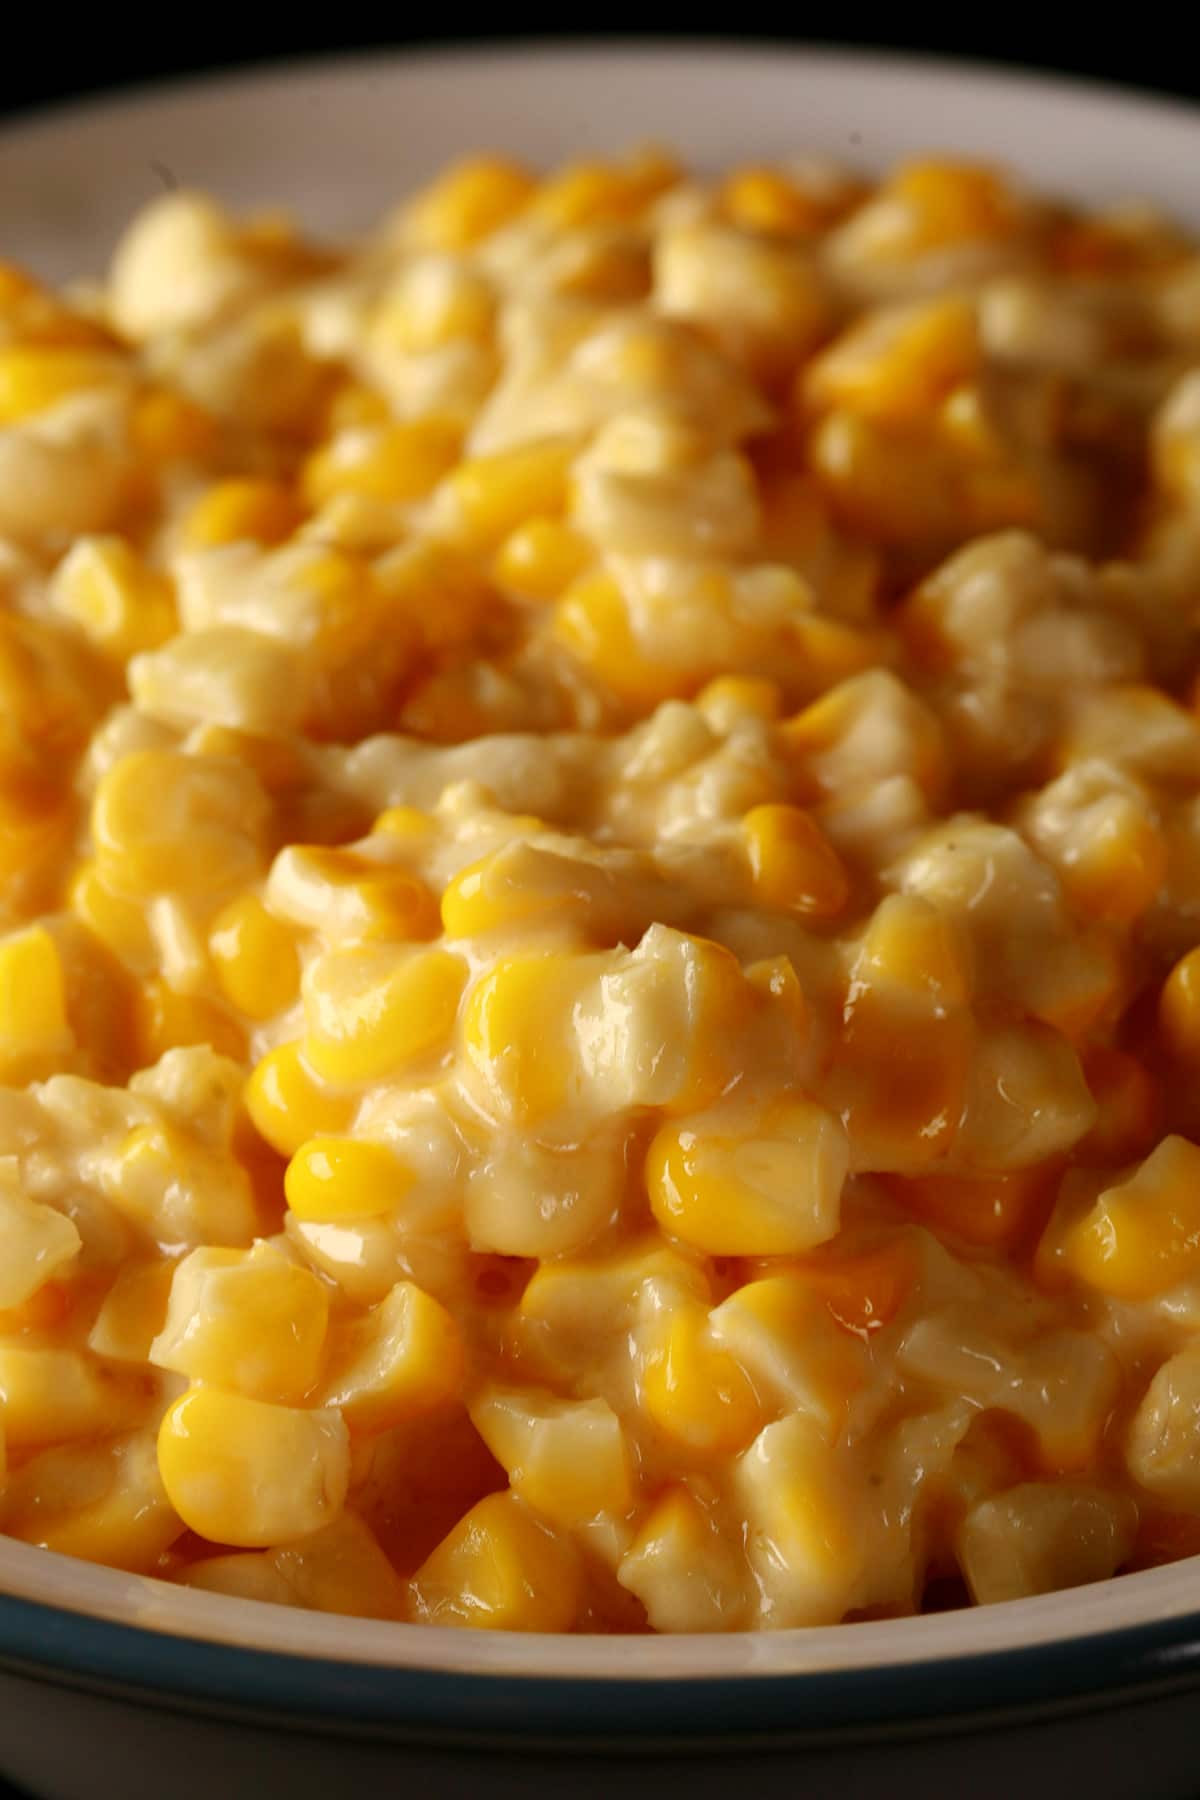 A large white bowl full of homemade creamed corn, against a black background.A large white bowl full of homemade creamed corn, against a black background.